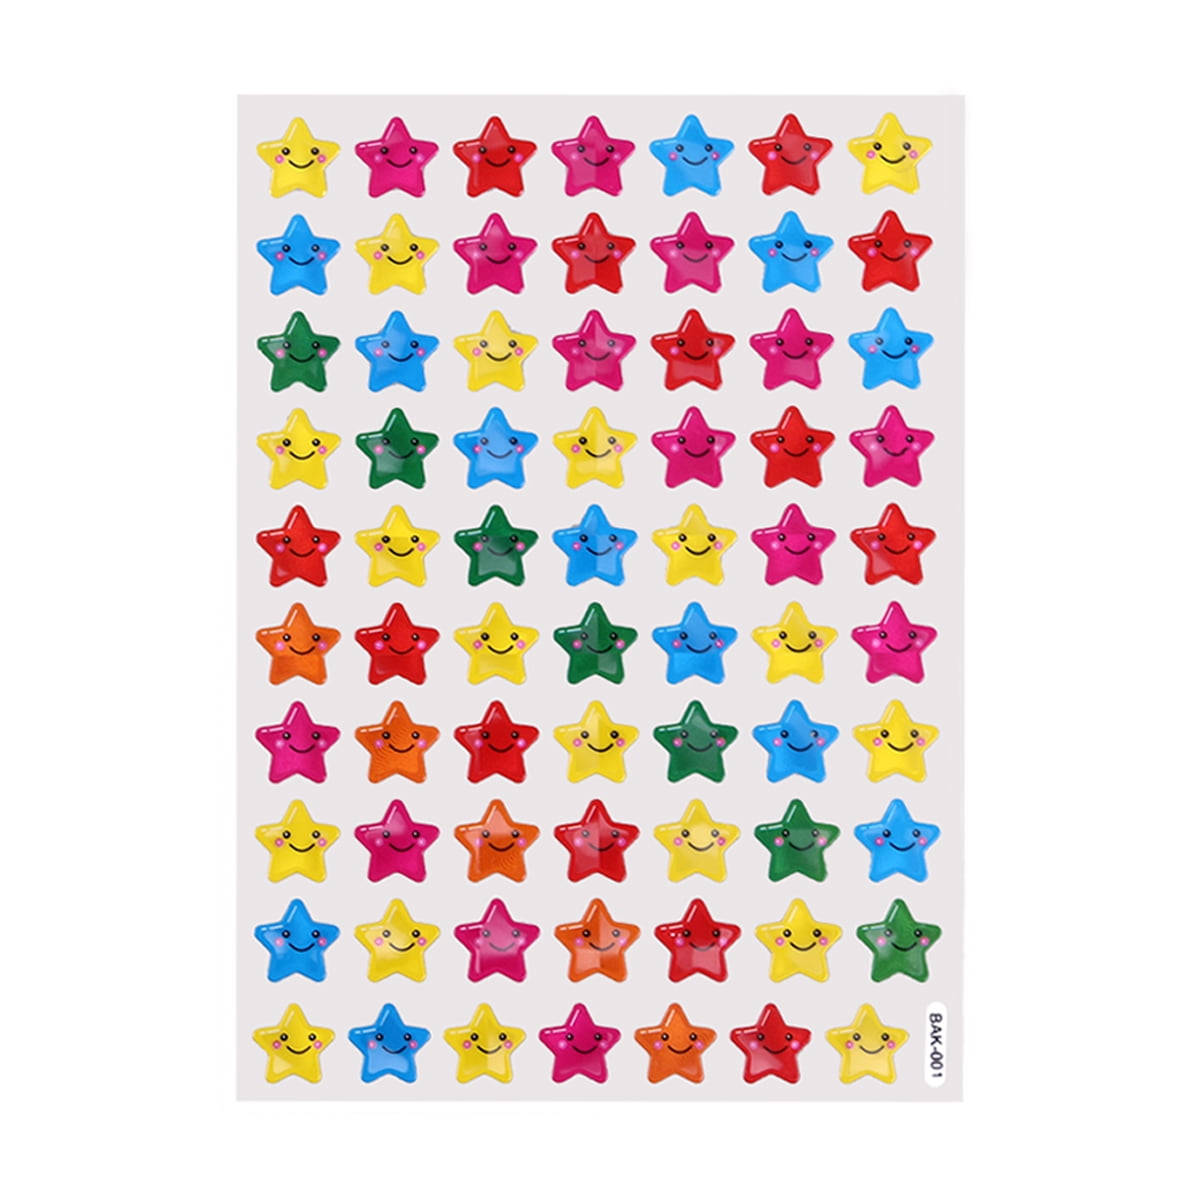 2880 Pack 60 Sheets Silver Star Stickers, 0.6 Diameter Reward Stickers for  Kids, Children, Face, Small Foil Star Stickers for Reward Chart (2880